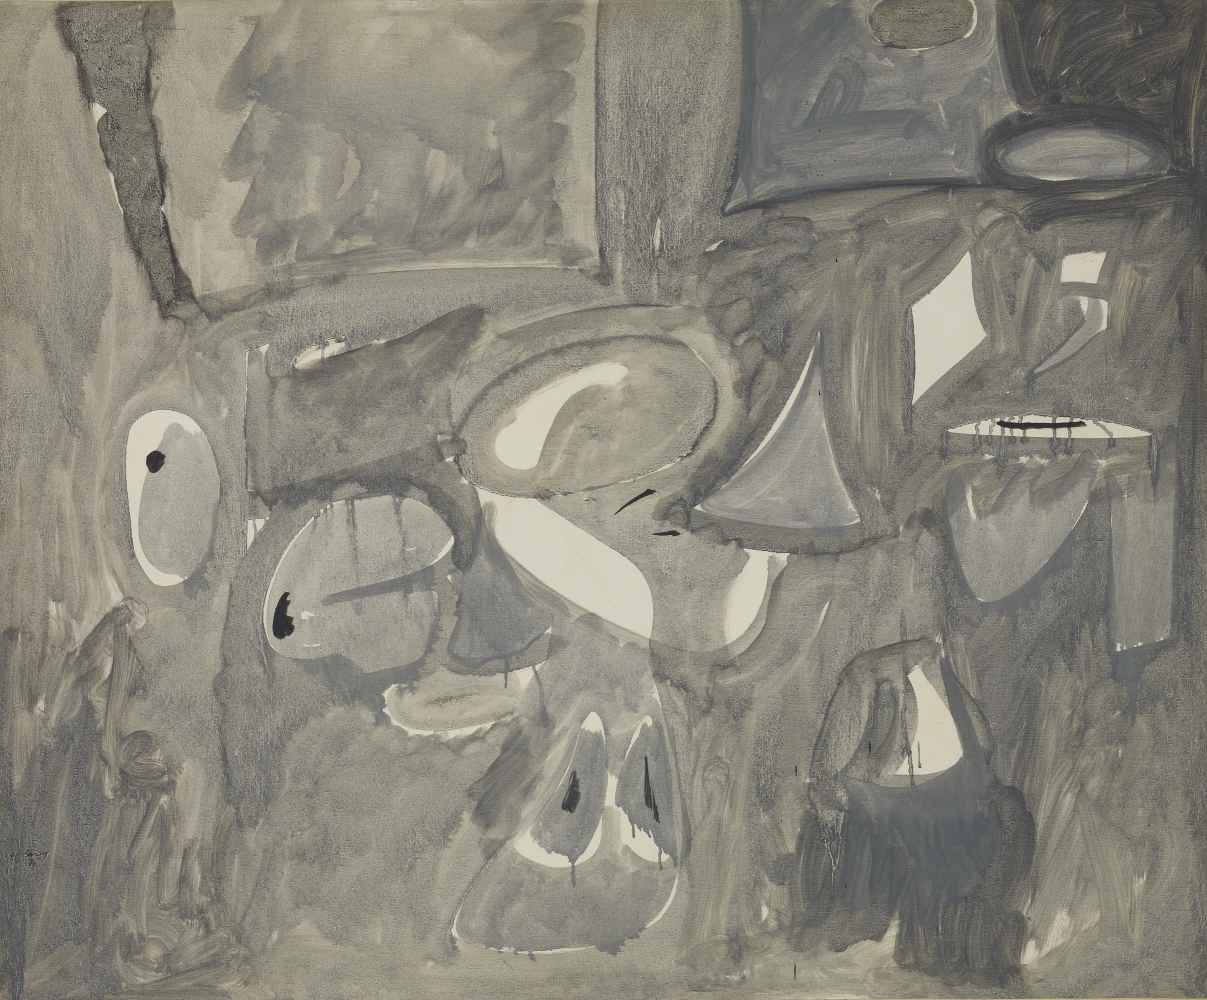 The Opaque, 1947, oil on canvas, 34 x 41 in. (86.4 x 104.1 cm). Private collection. [AGCR: P346]